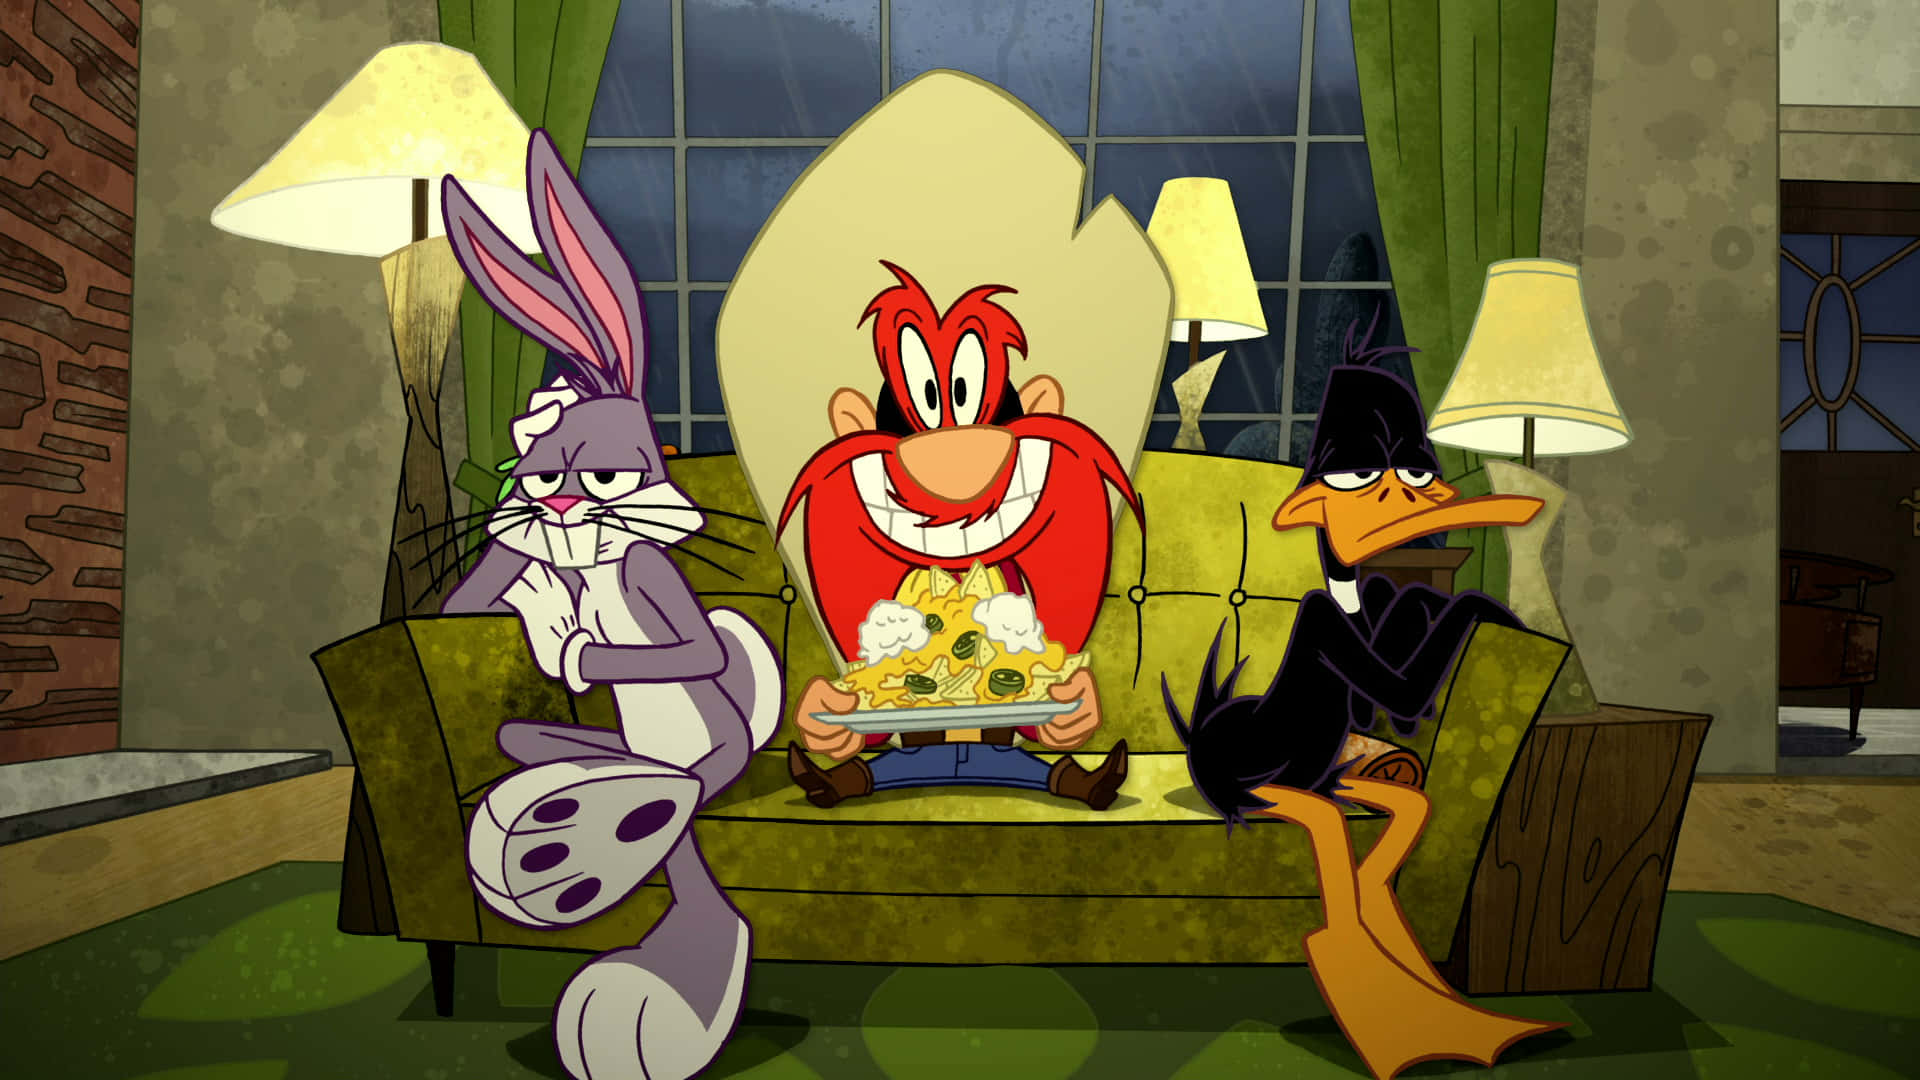 Show Off your Classic Cartoons with this Looney Tunes Wallpaper